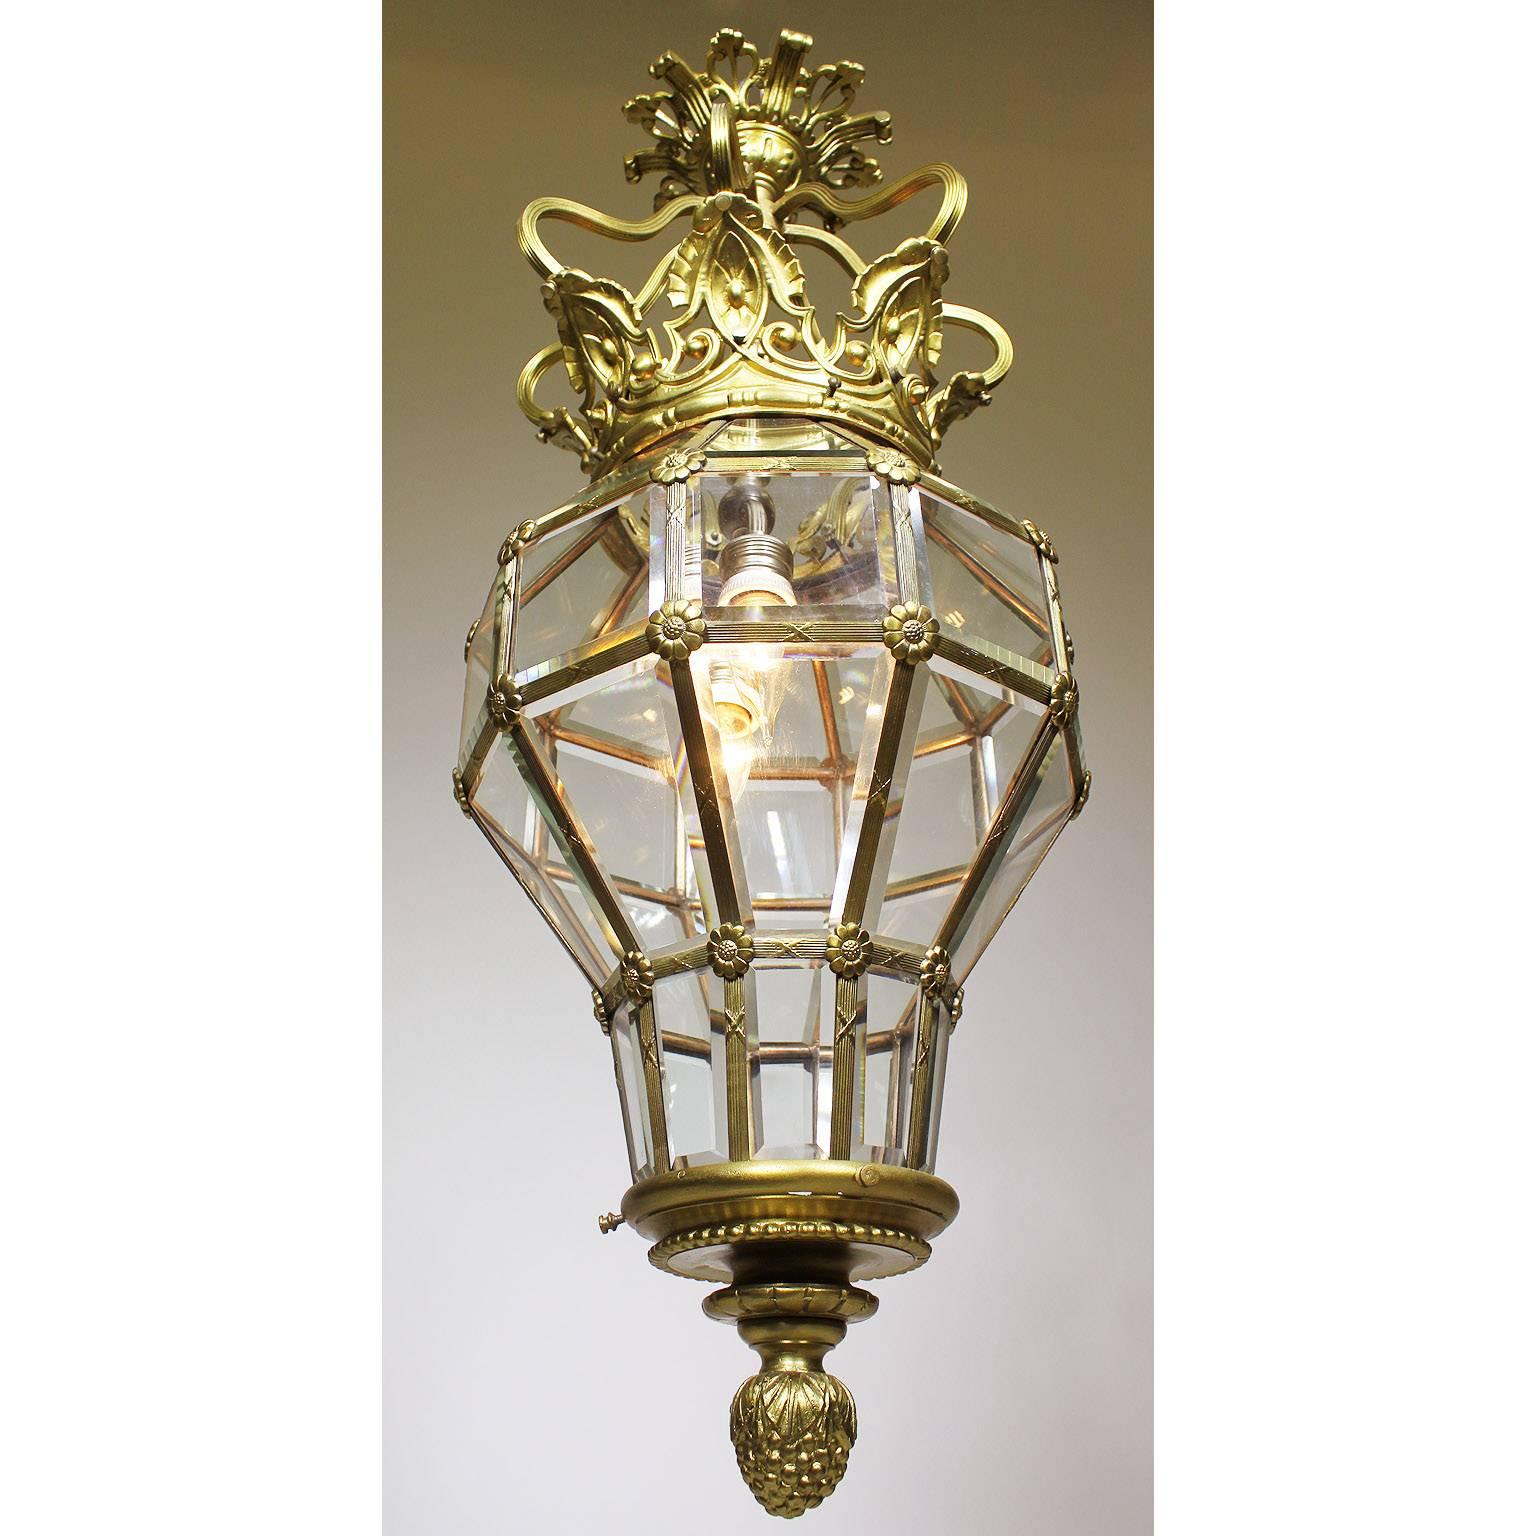 A French early 20th century gilt-metal paneled beveled glass 